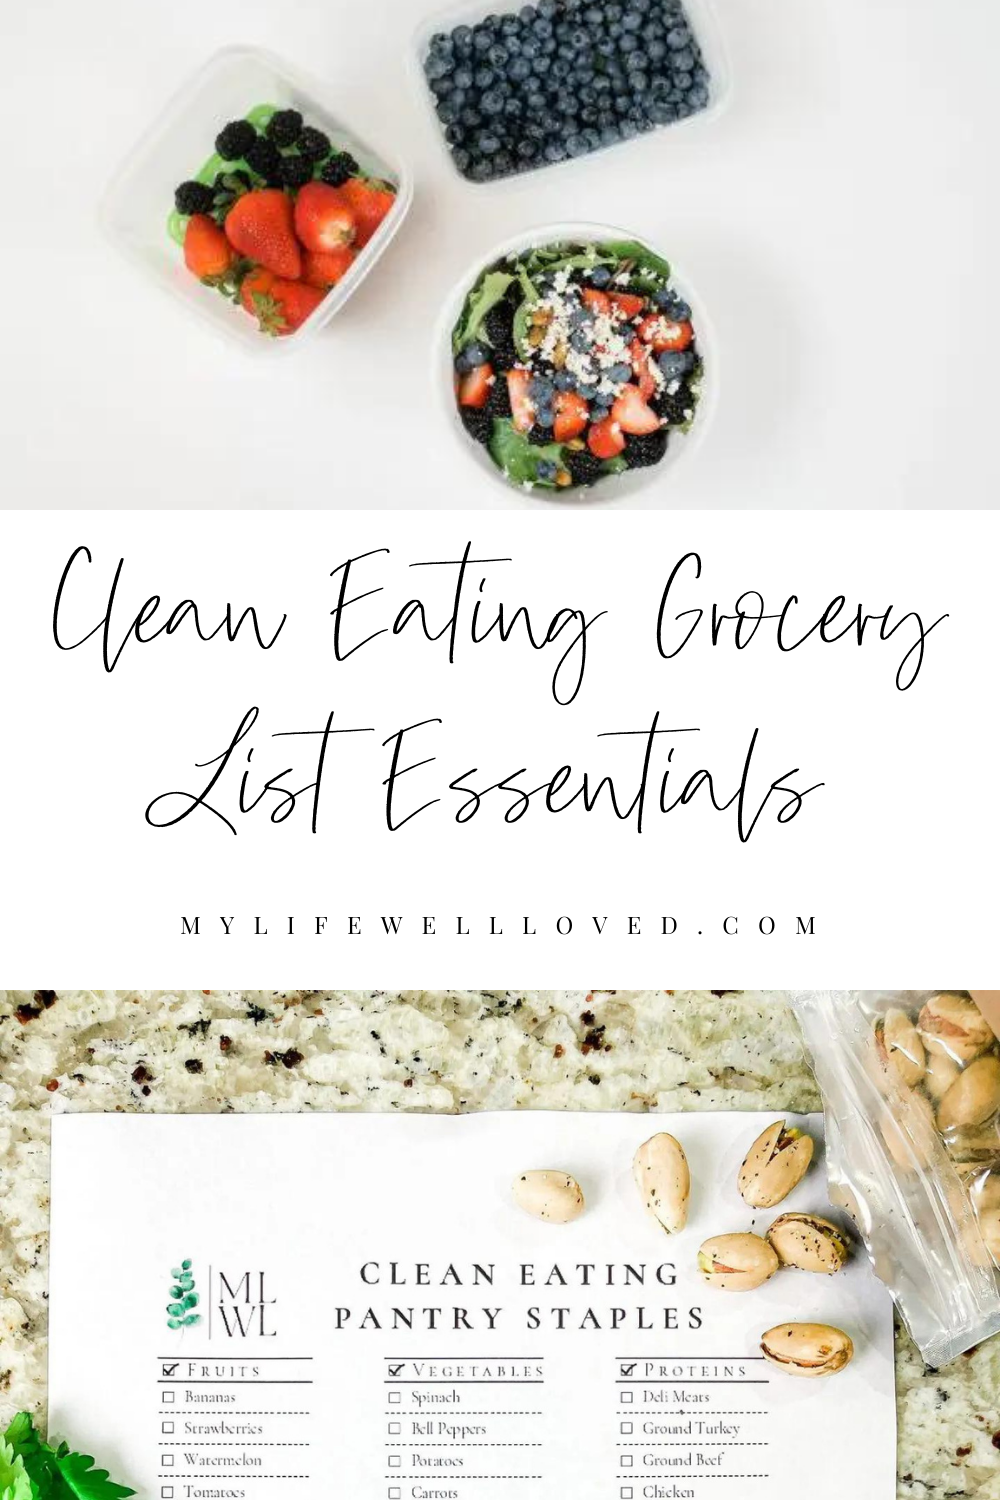 Healthy lifestyle + fitness blogger, My Life Well Loved, shares her clean eating grocery list! Click NOW to learn more!